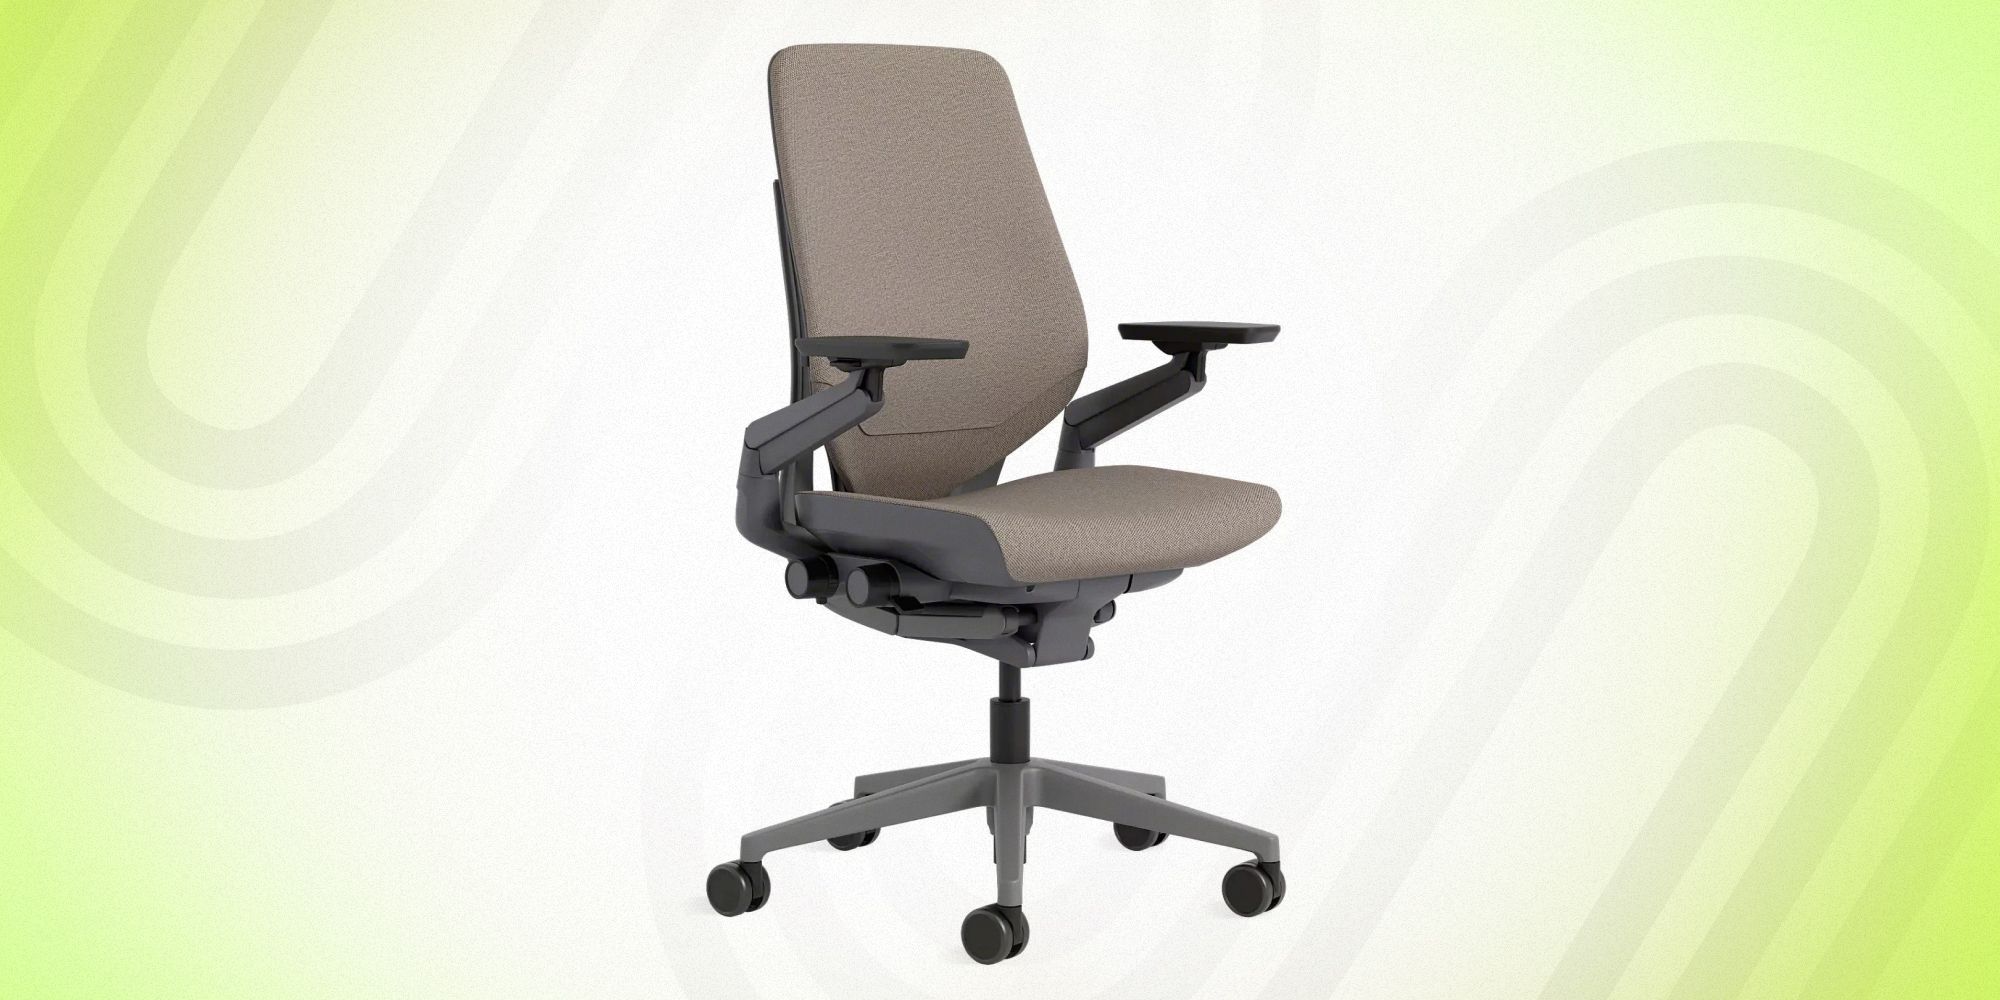 The 5 best ergonomic office chairs of 2022